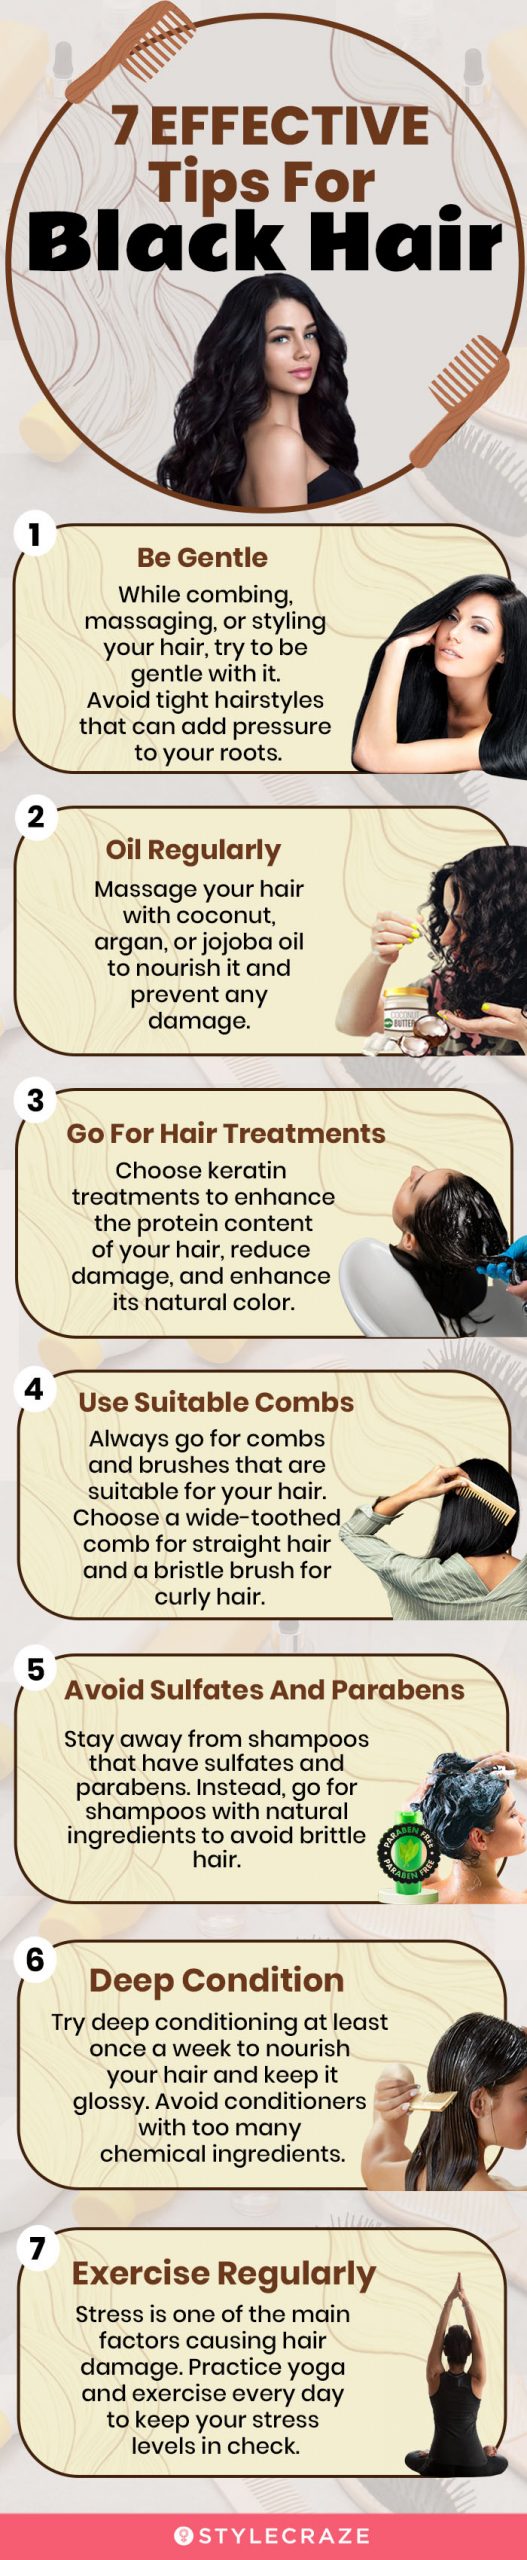 7 effective tips for black hair (infographic)